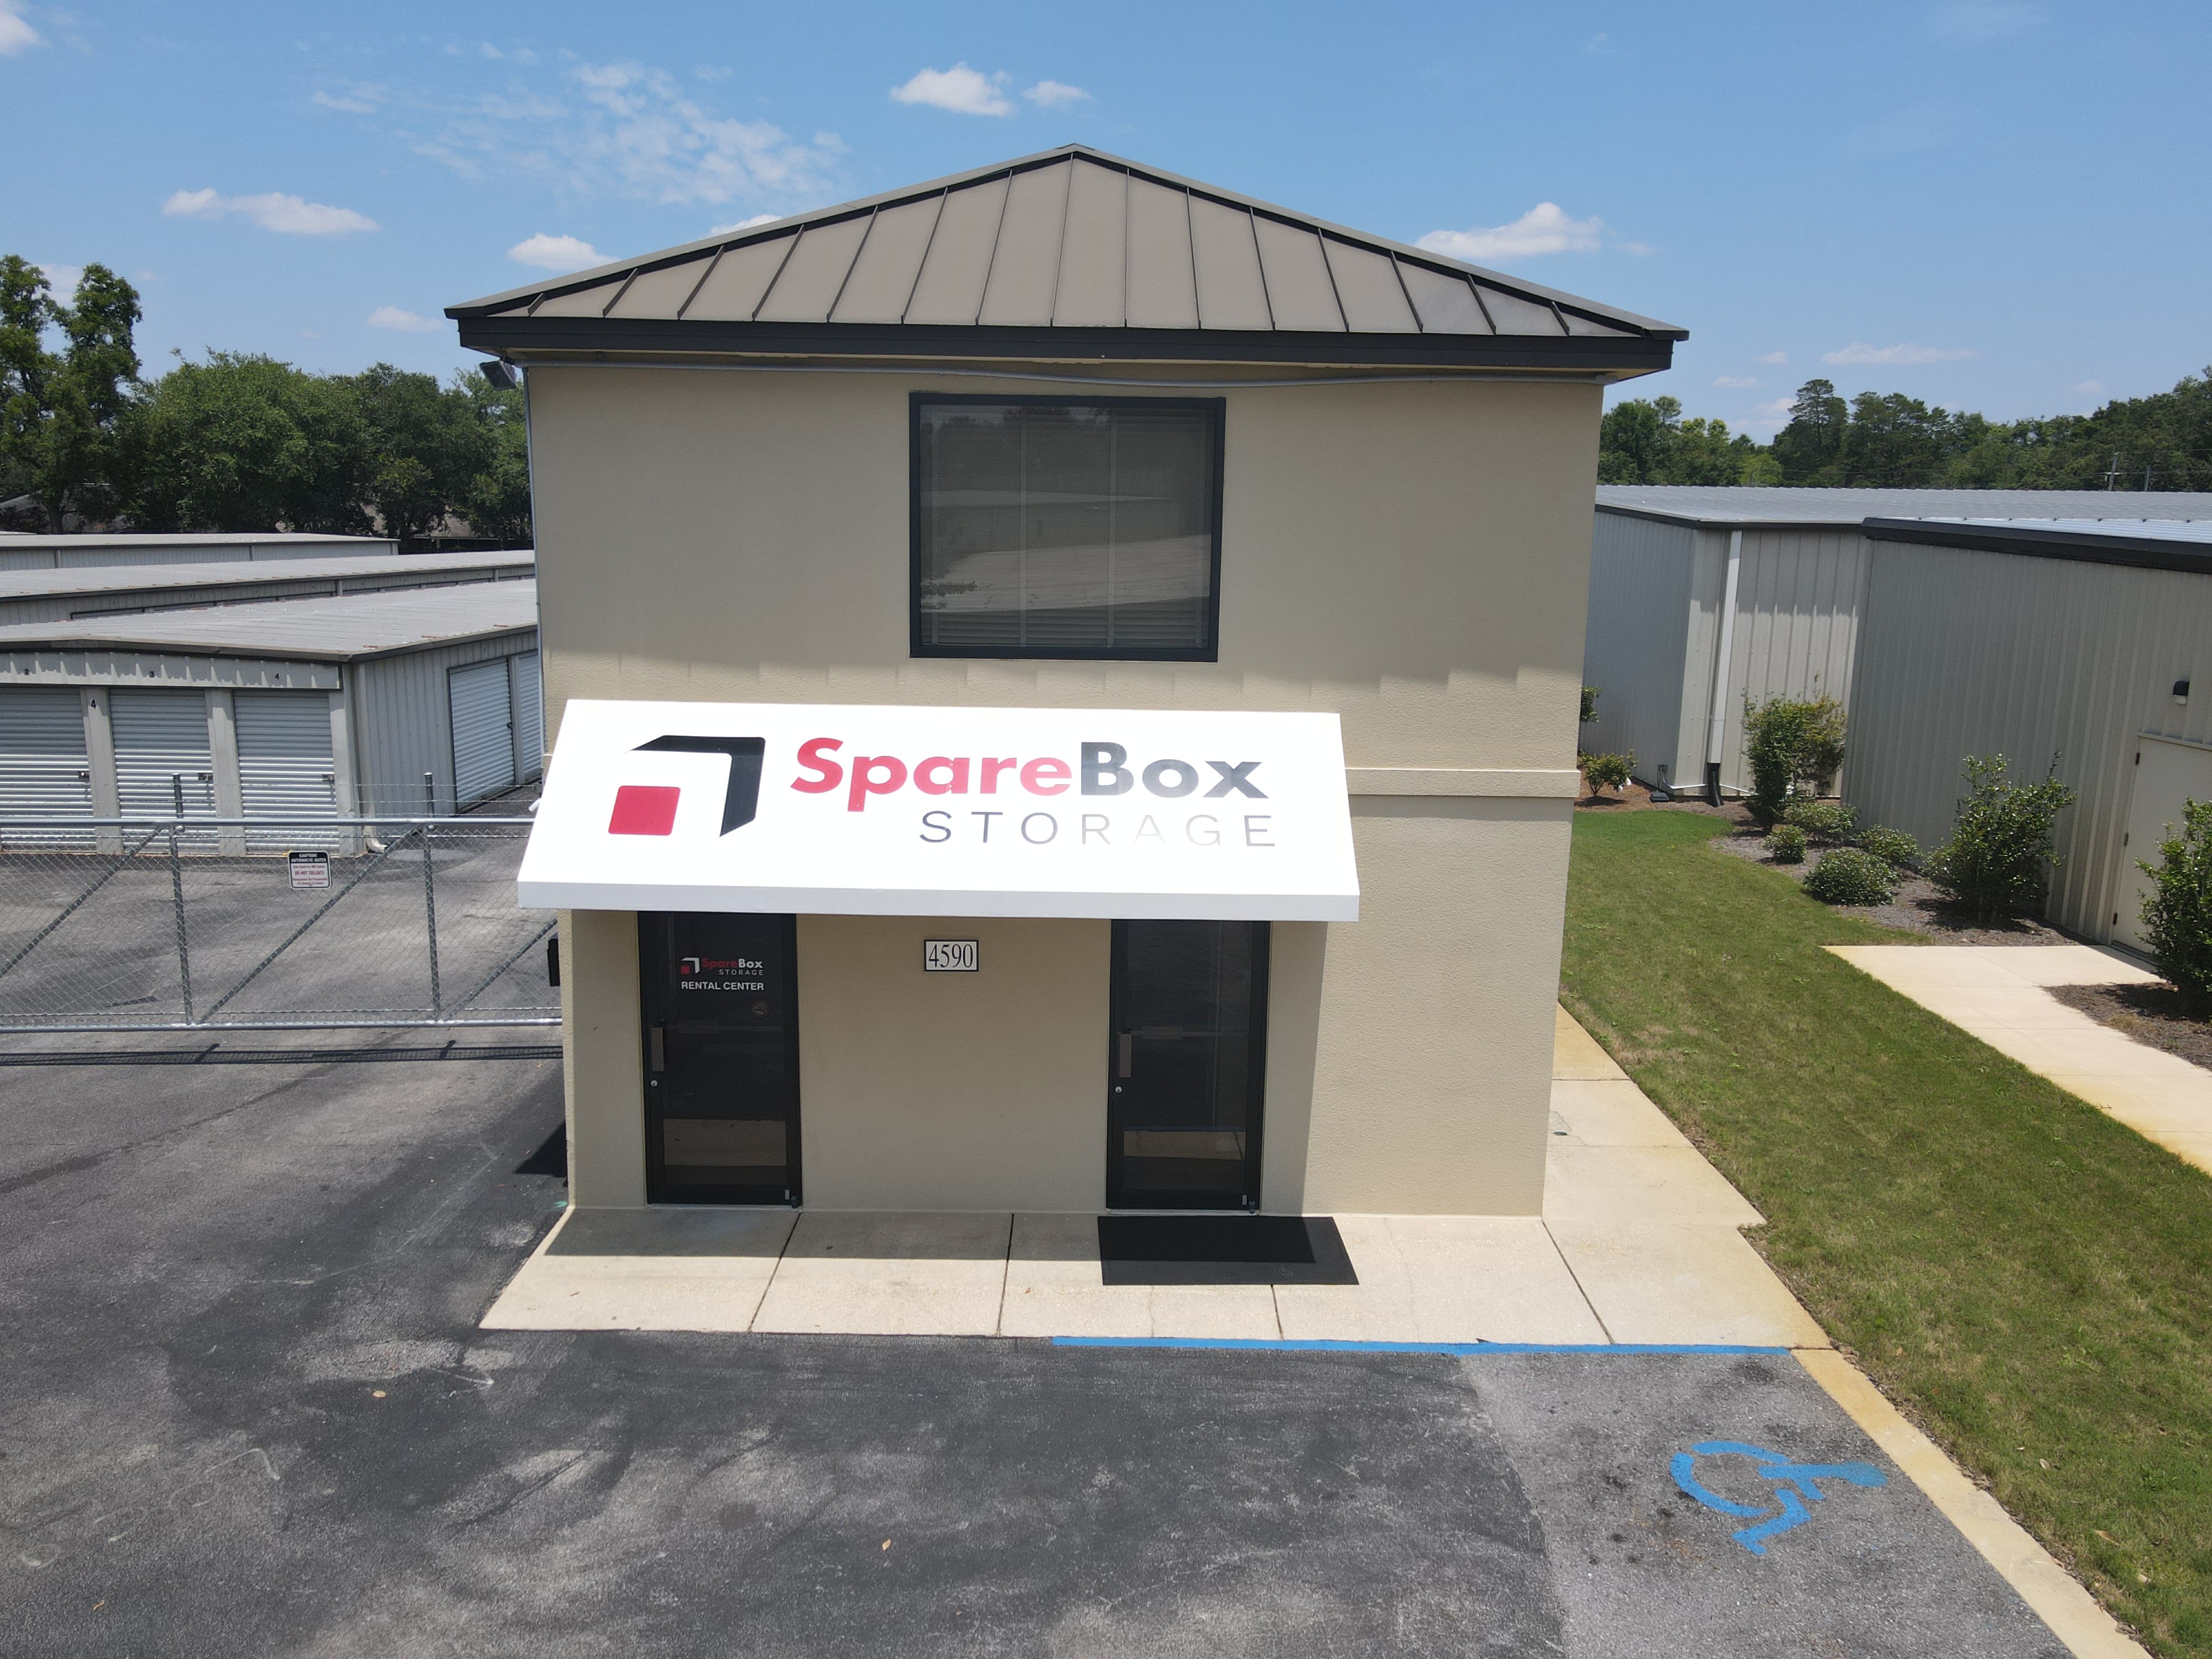 Meet all your self storage needs in Niceville, FL with our location at 4592 FL-20 | SpareBox Storage